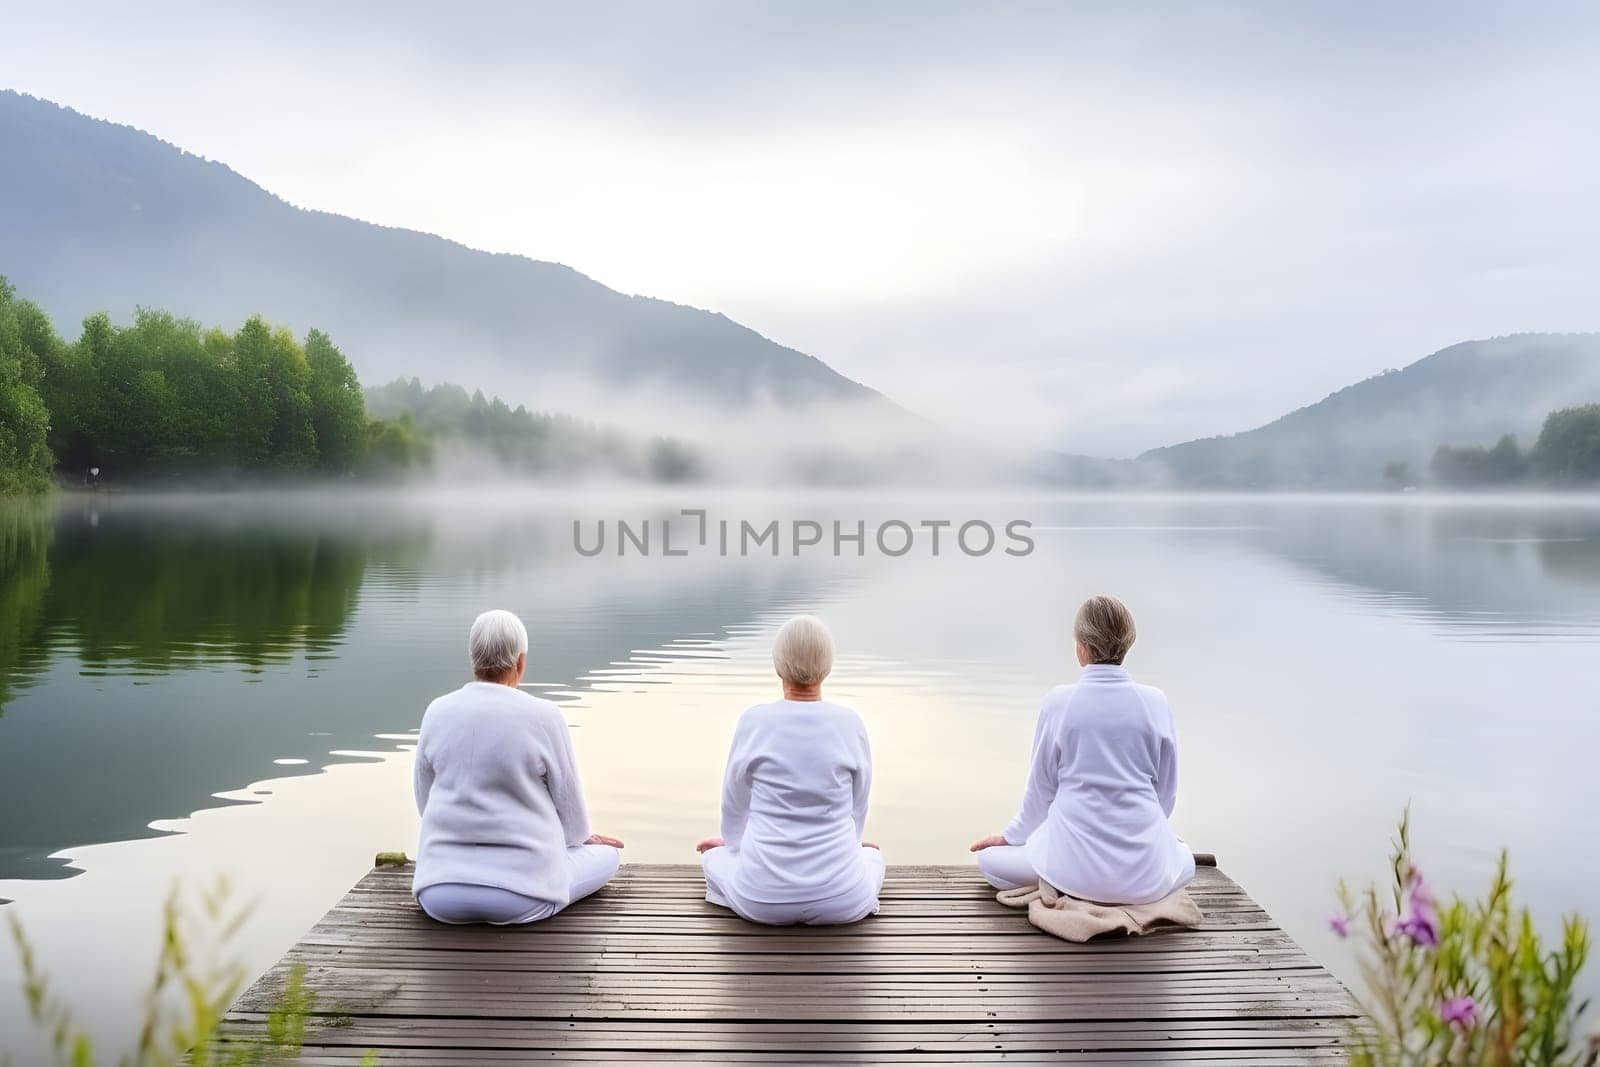 rear view of group of senior women doing yoga exercises on wooden pier in front of summer morning lake, neural network generated photorealistic image by z1b